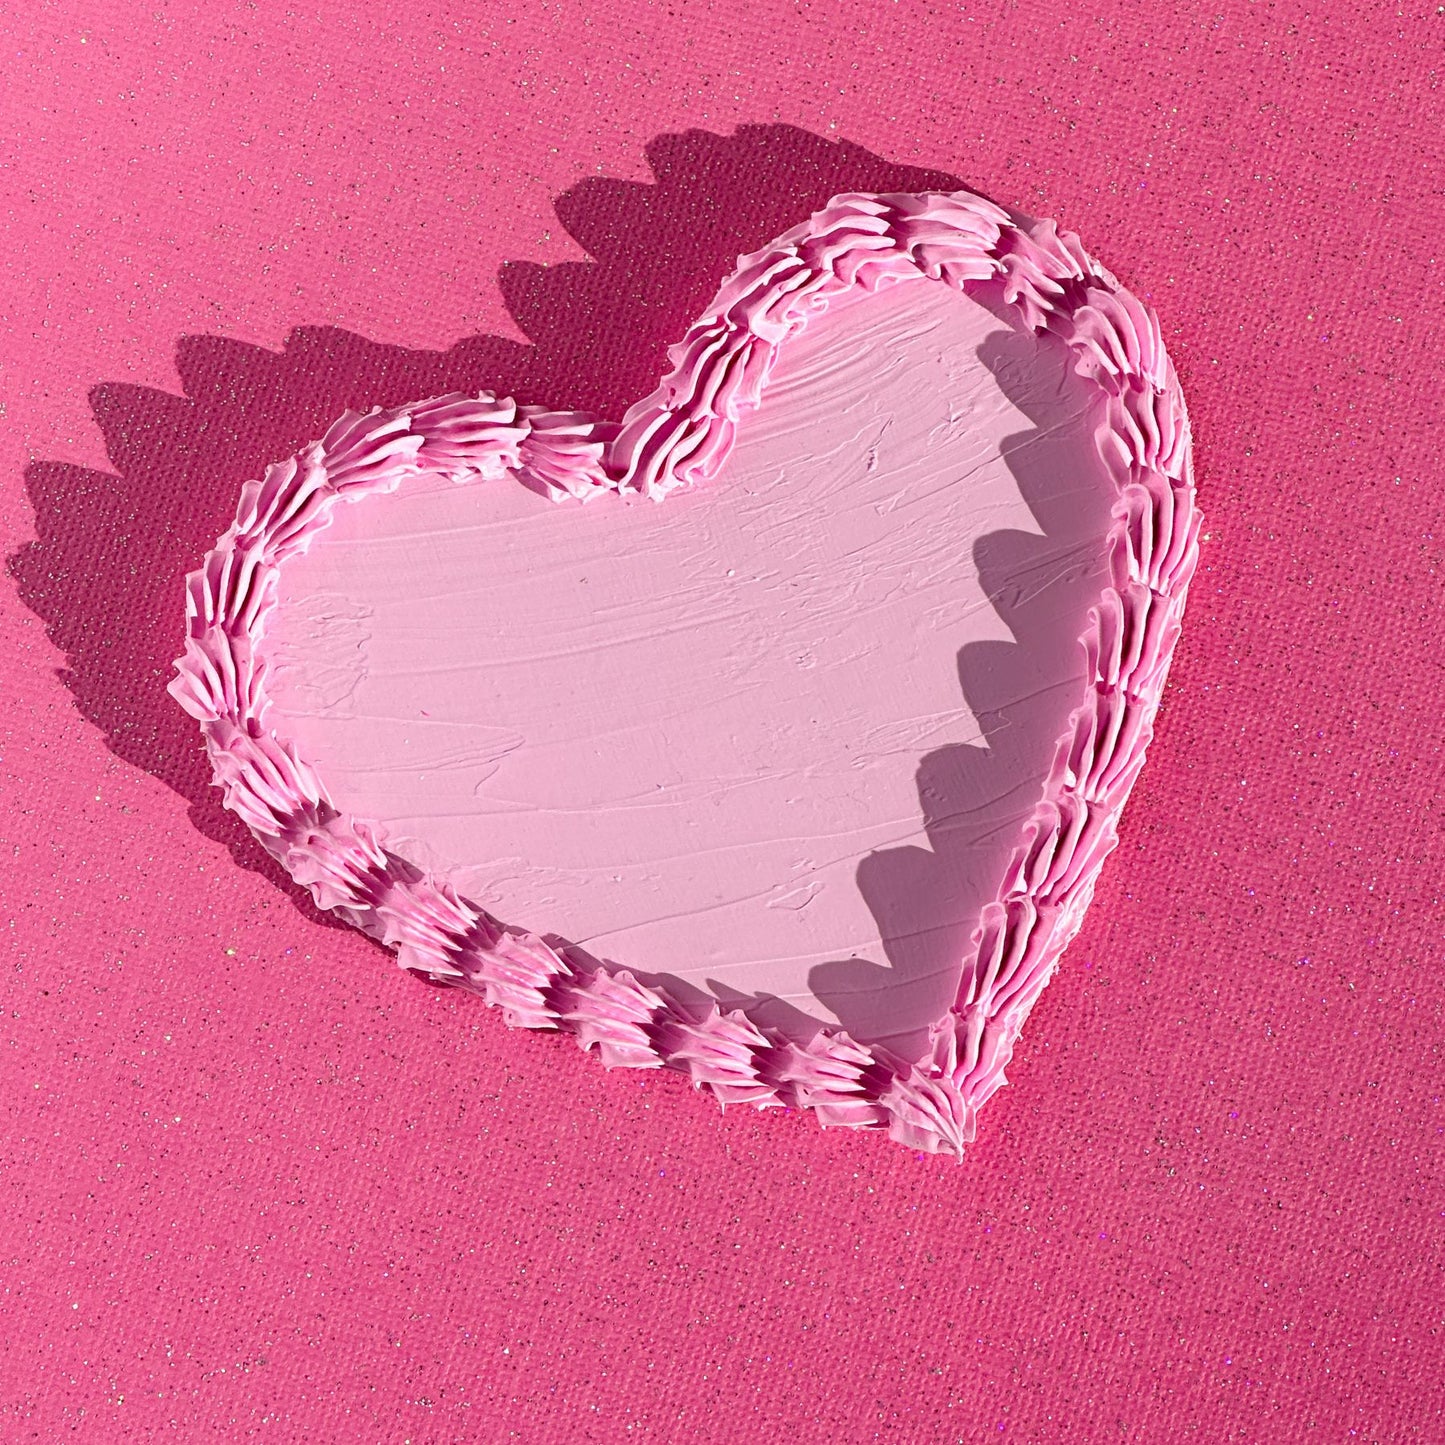 3D Painted Cookie - Heart With Pink "Frosting"